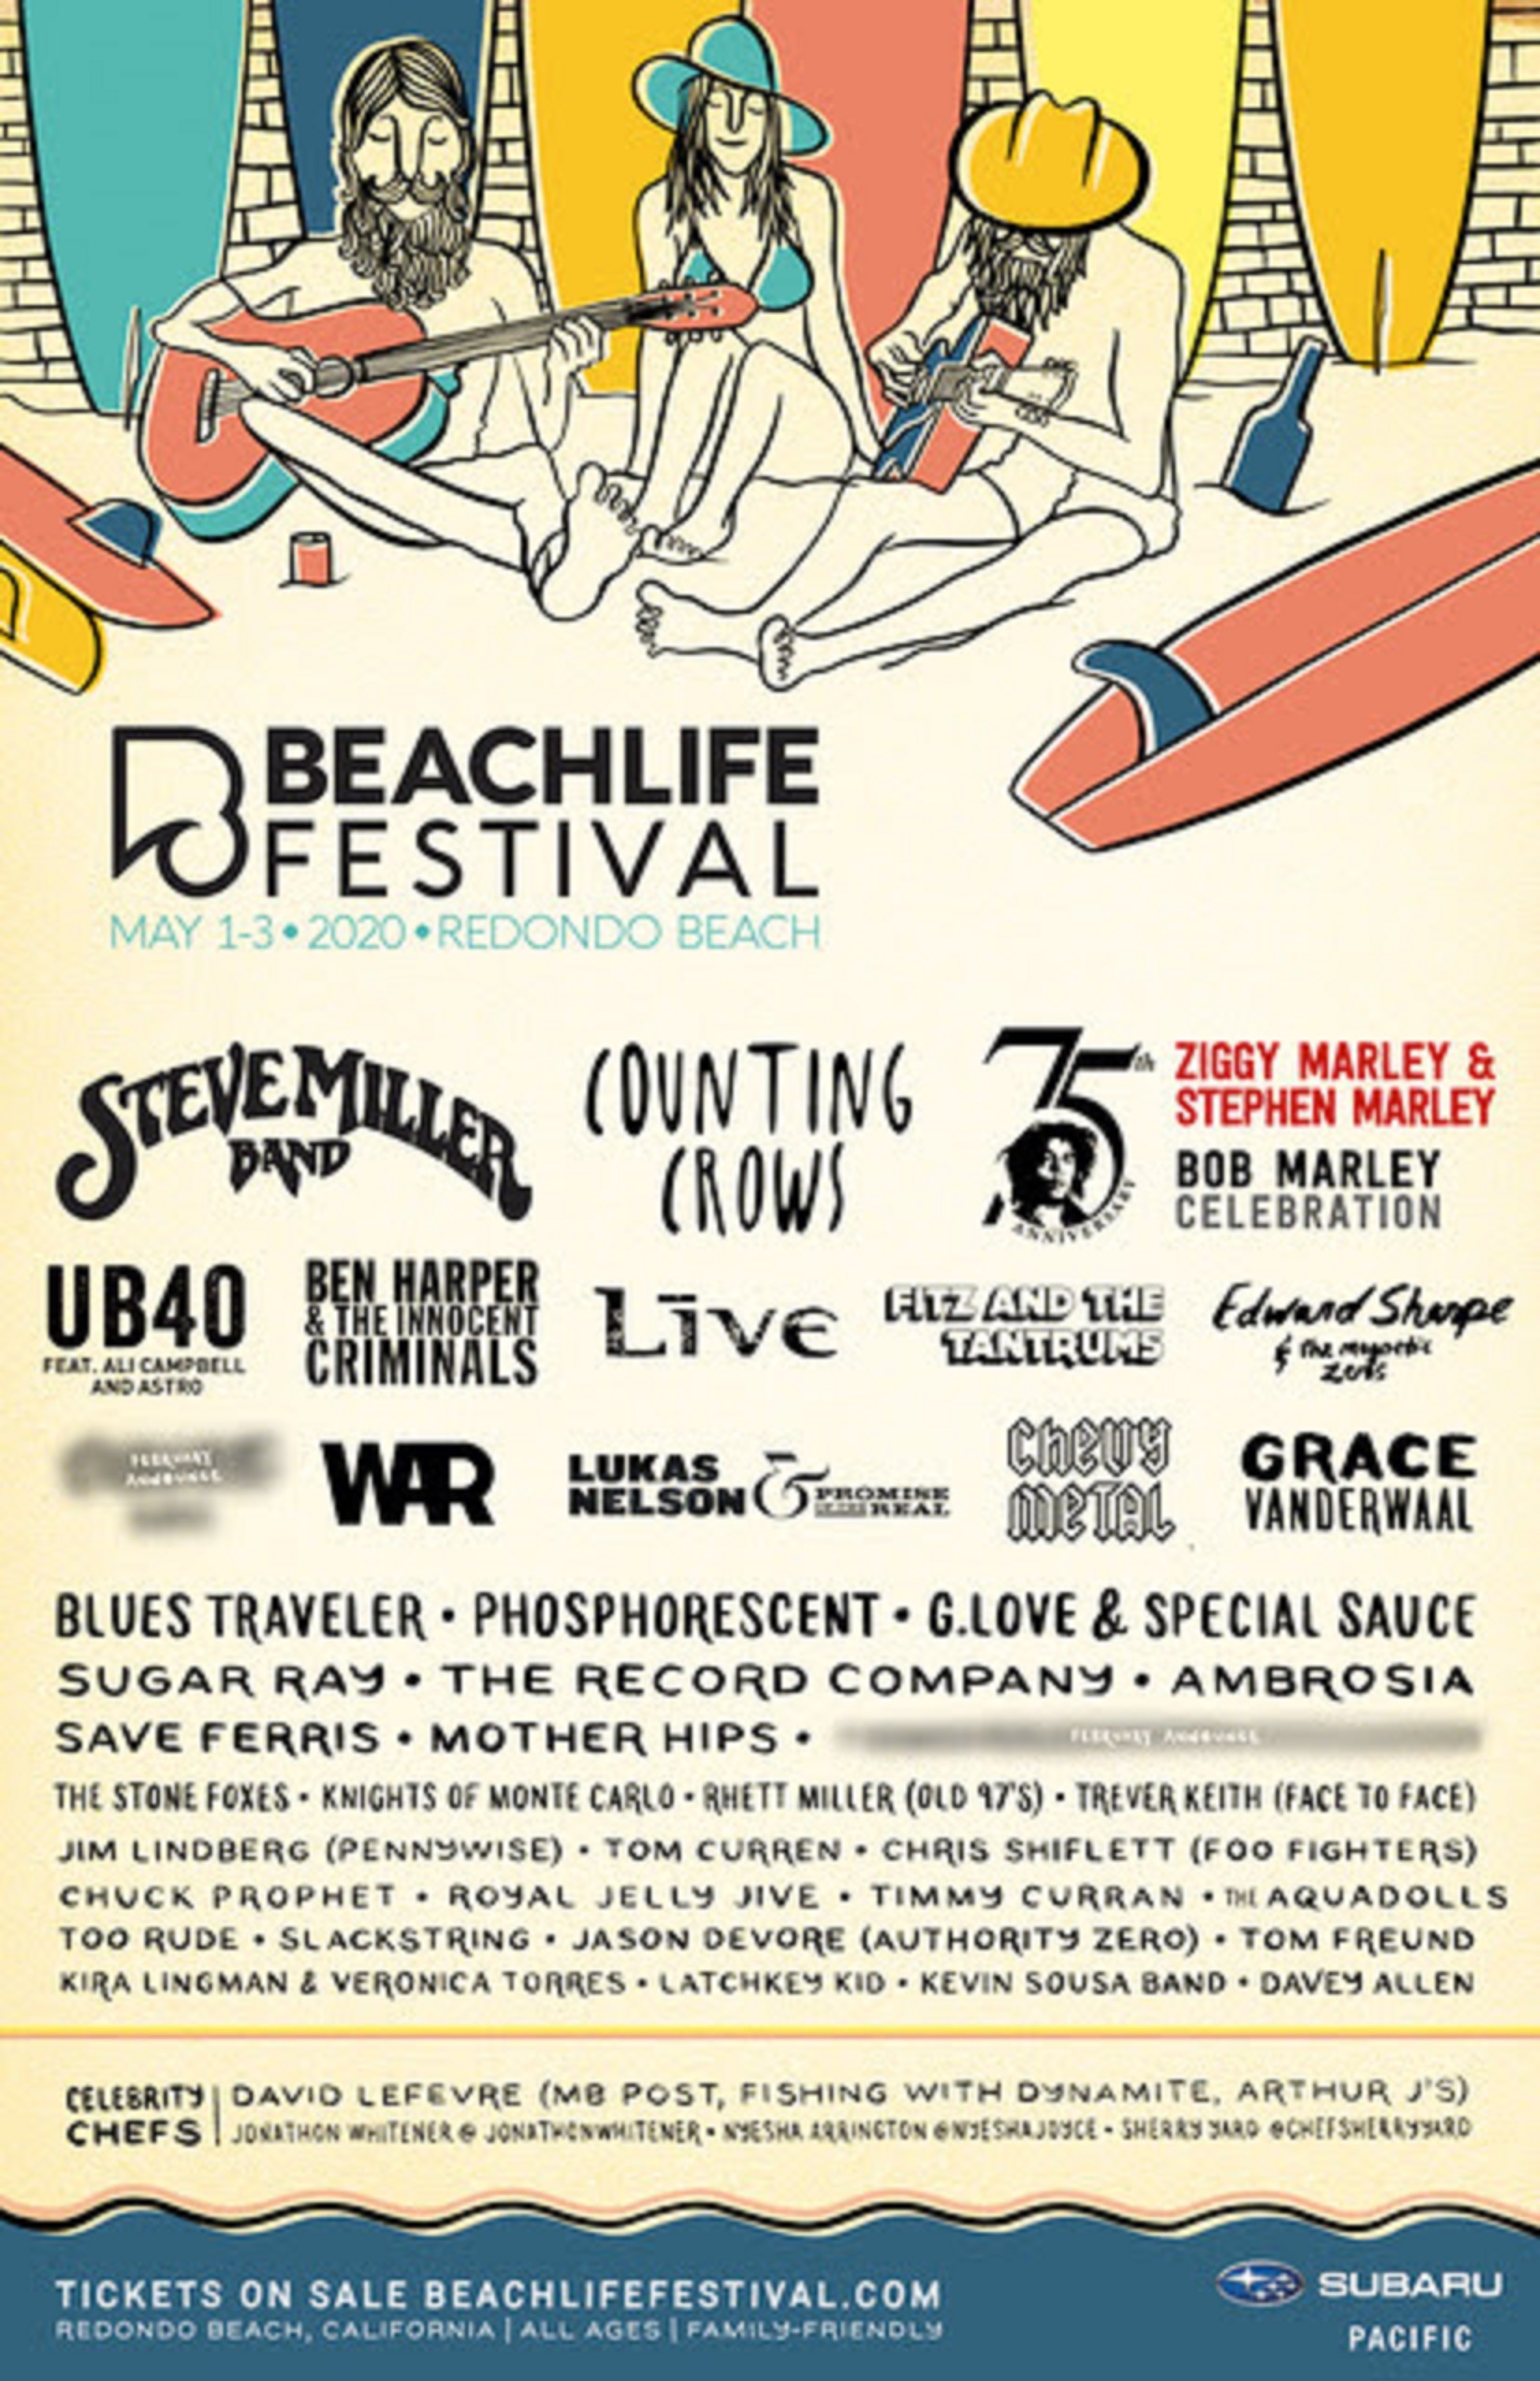 BEACHLIFE Announces STEVE MILLER BAND, COUNTING CROWS, BOB MARLEY Tribute with ZIGGY MARLEY & STEPHEN MARLEY, and more